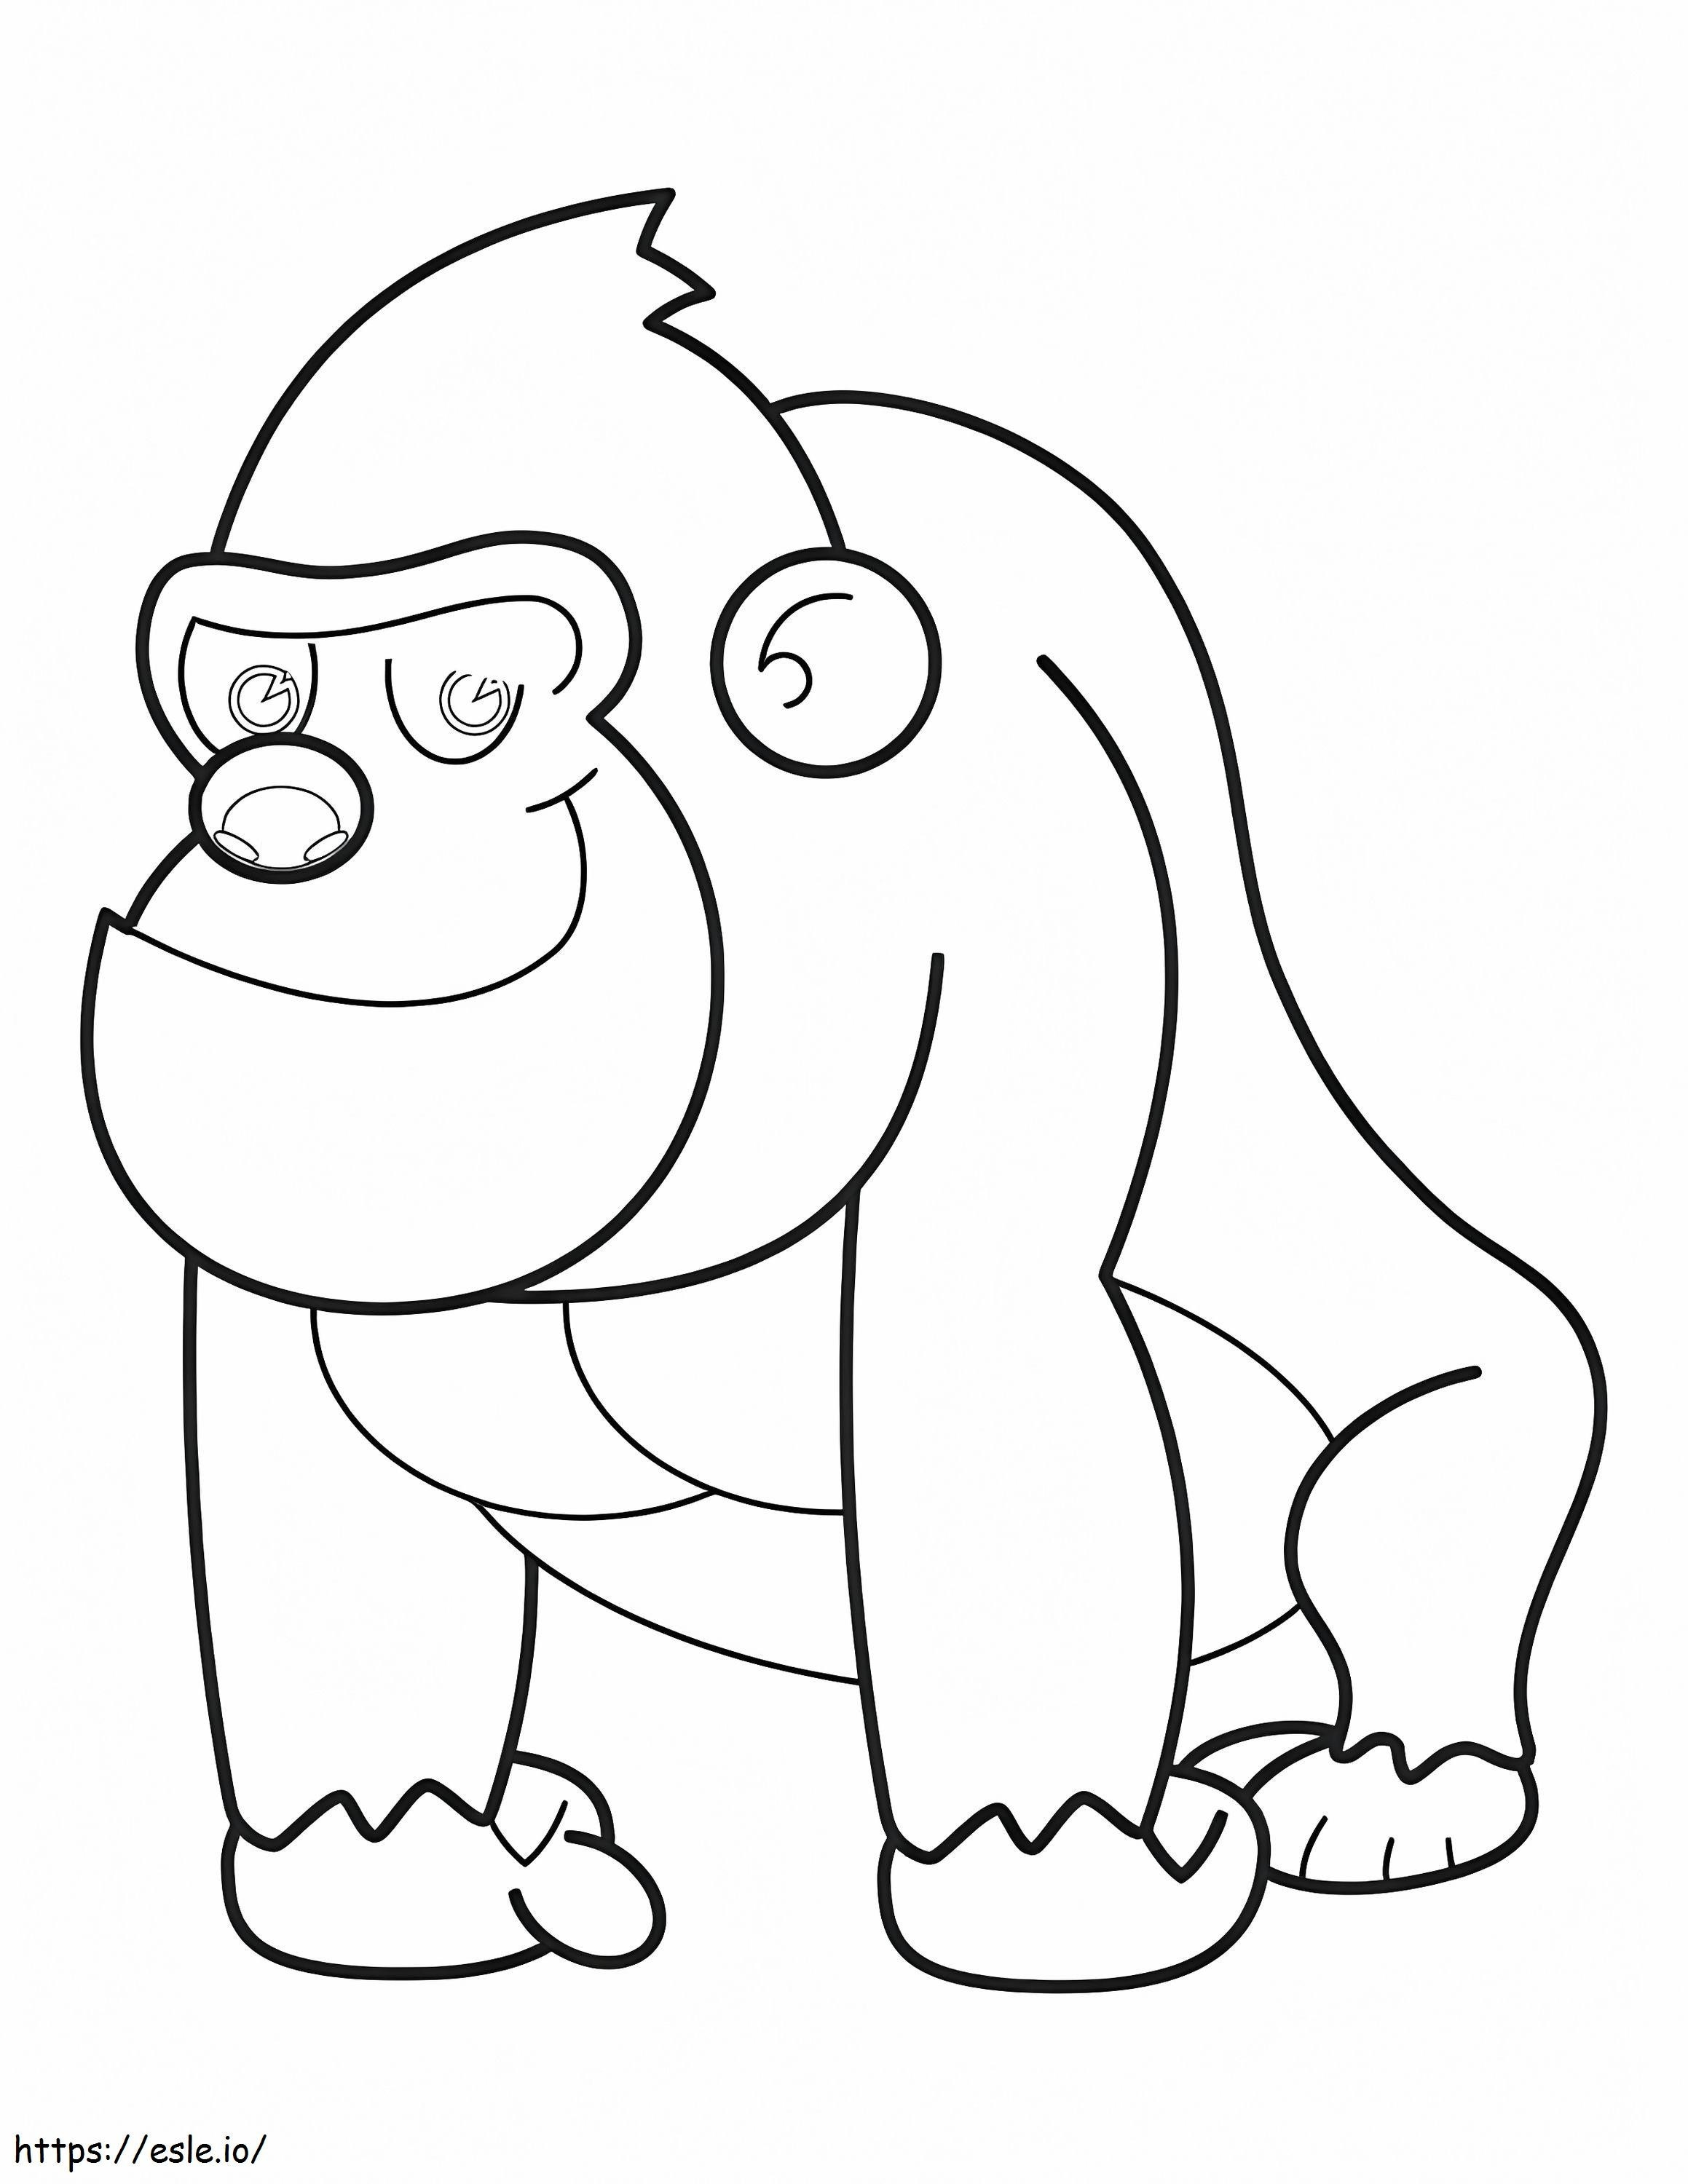 Basic Apes coloring page